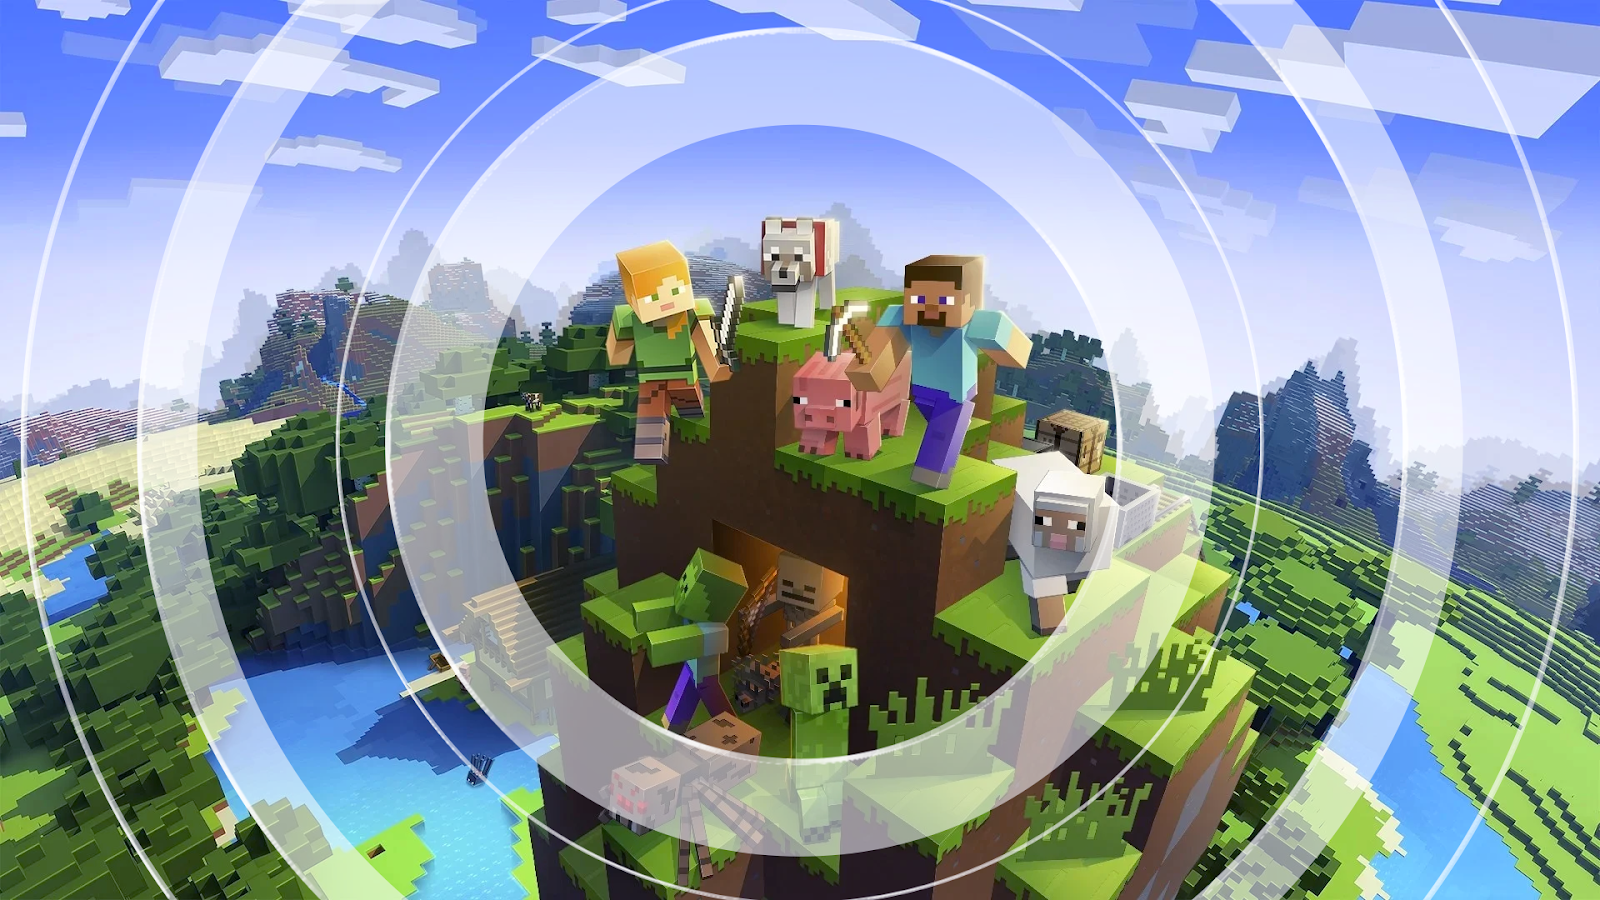 Minecraft' now livestreams building sessions directly to Mixer